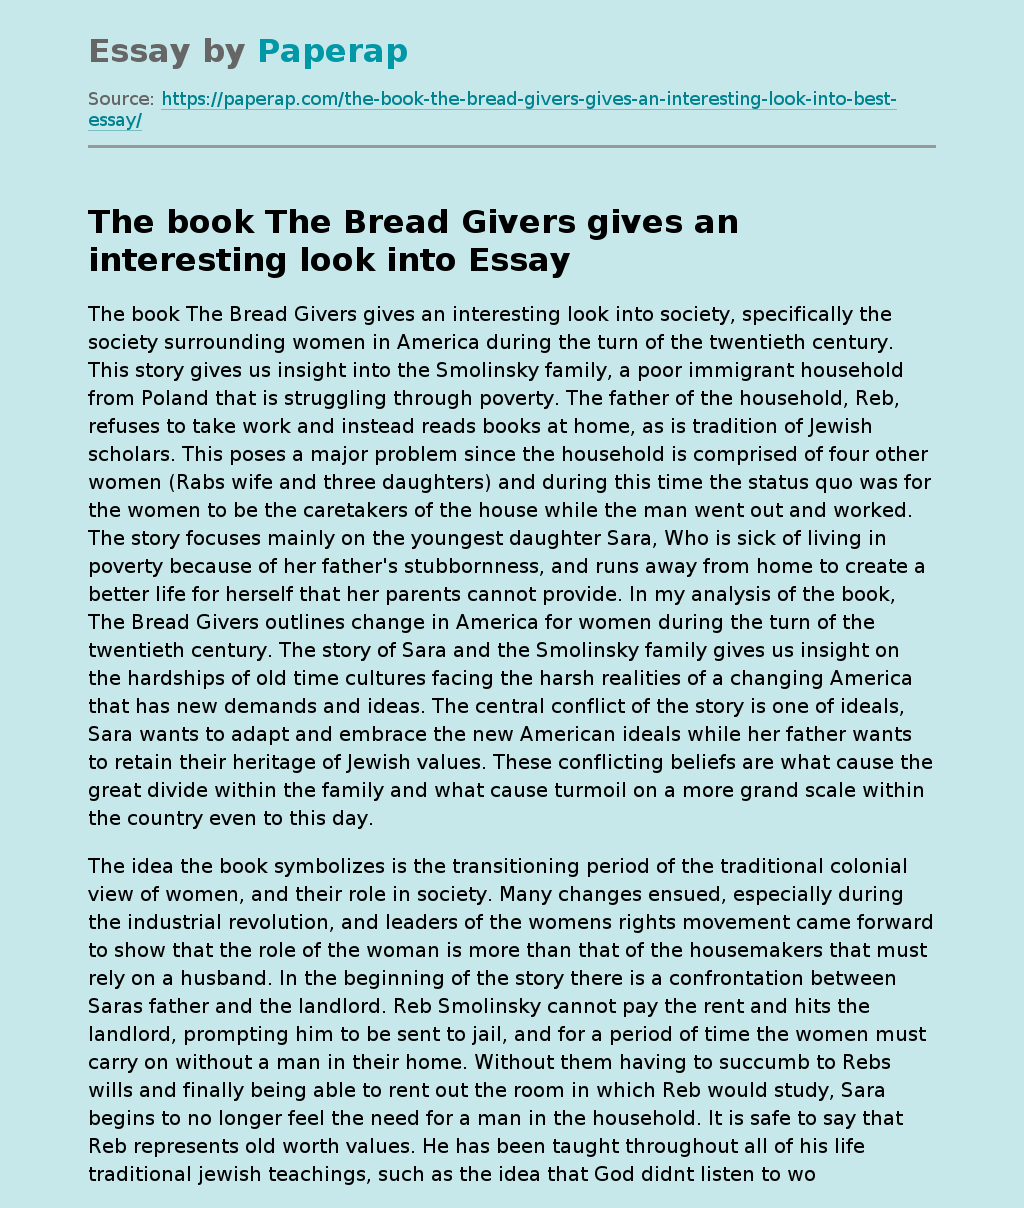 "The Bread Givers"